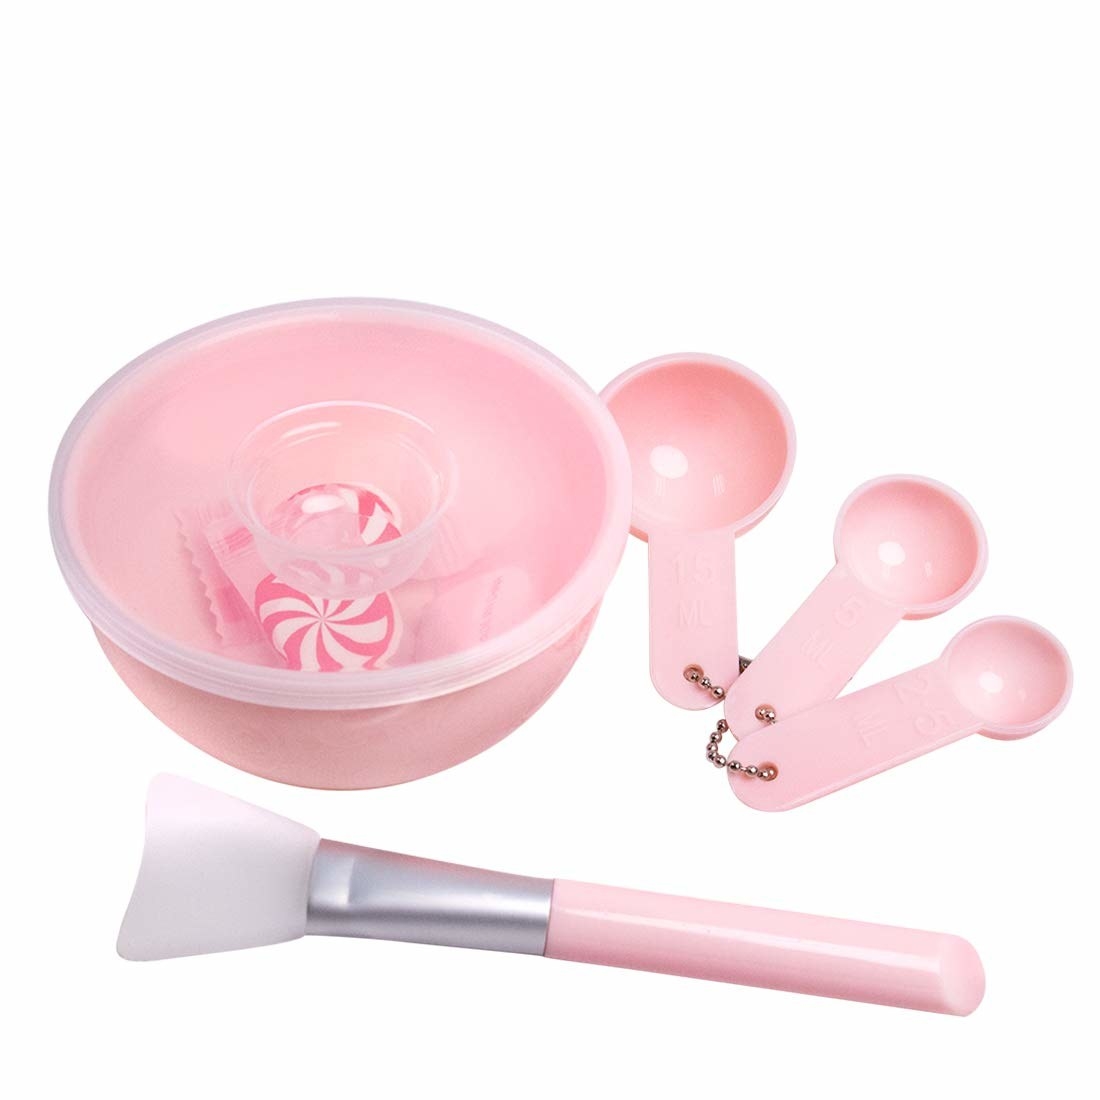 A pink facemask application kit 